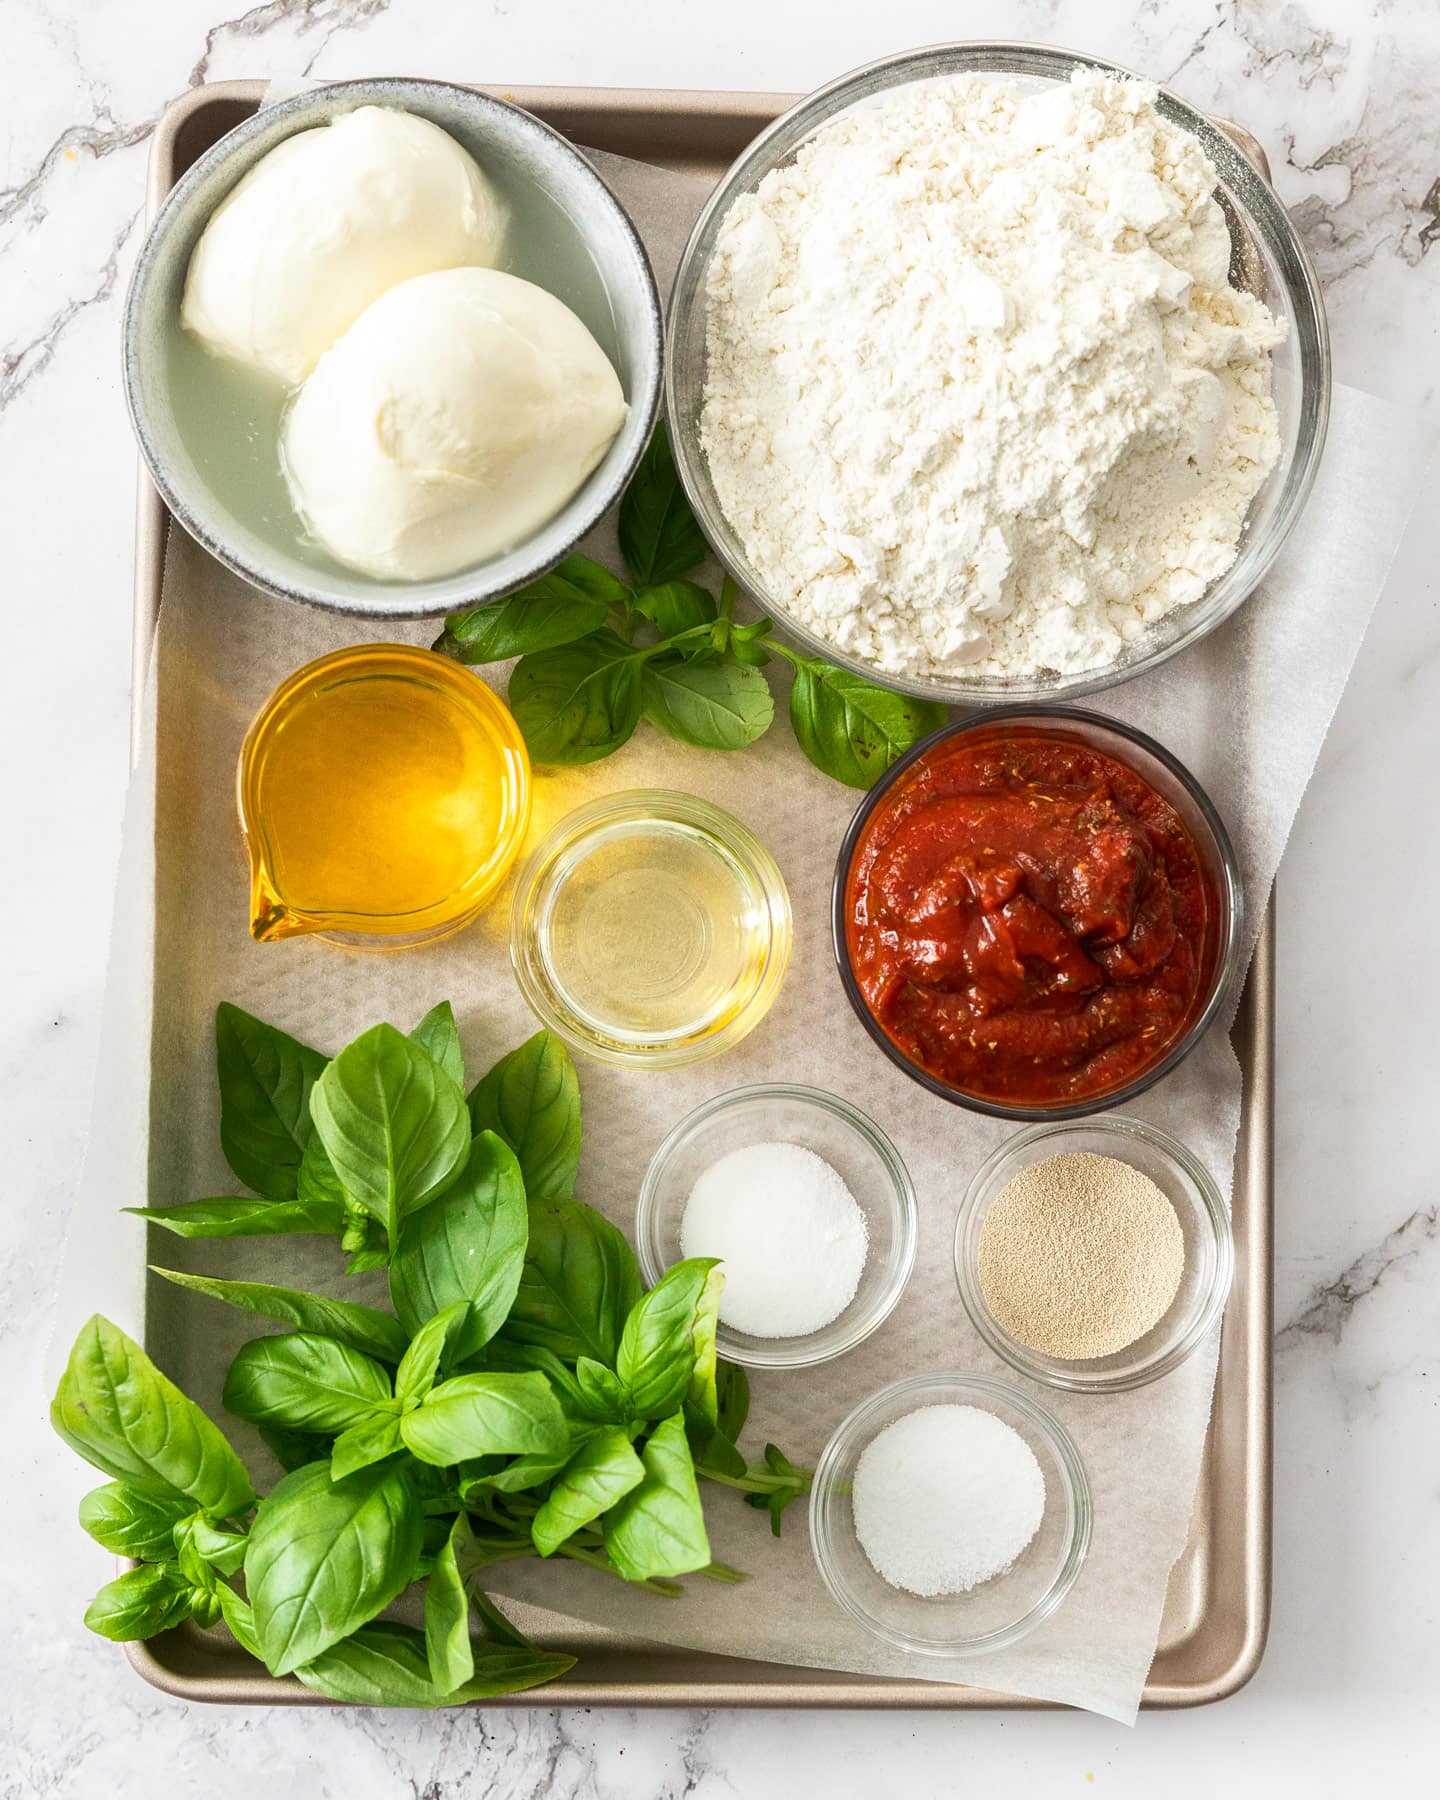 Ingredients for pizza fritta on a baking tray.